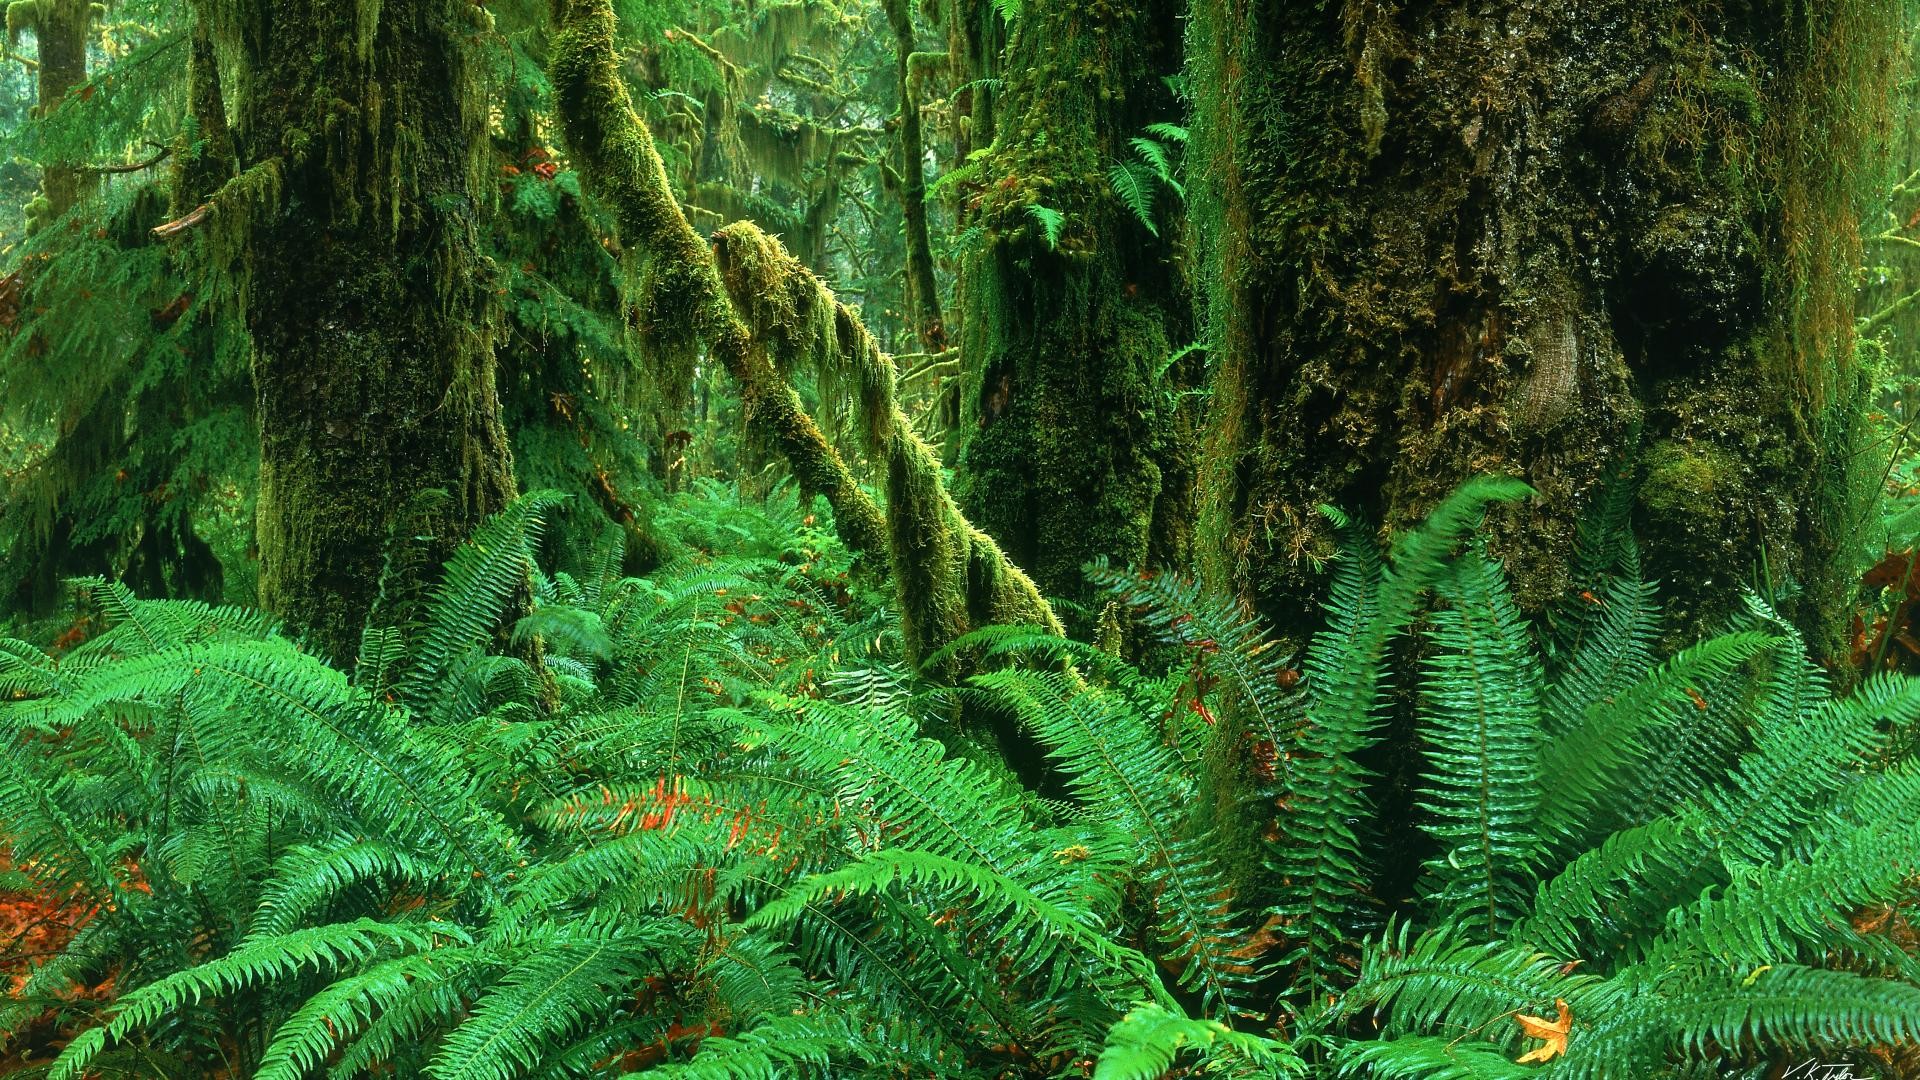 1920x1080 Download Background - Hoh Rainforest, Olympic National Park, Washington -  Free Cool Backgrounds and Wallpapers for your Desktop Or Laptop.